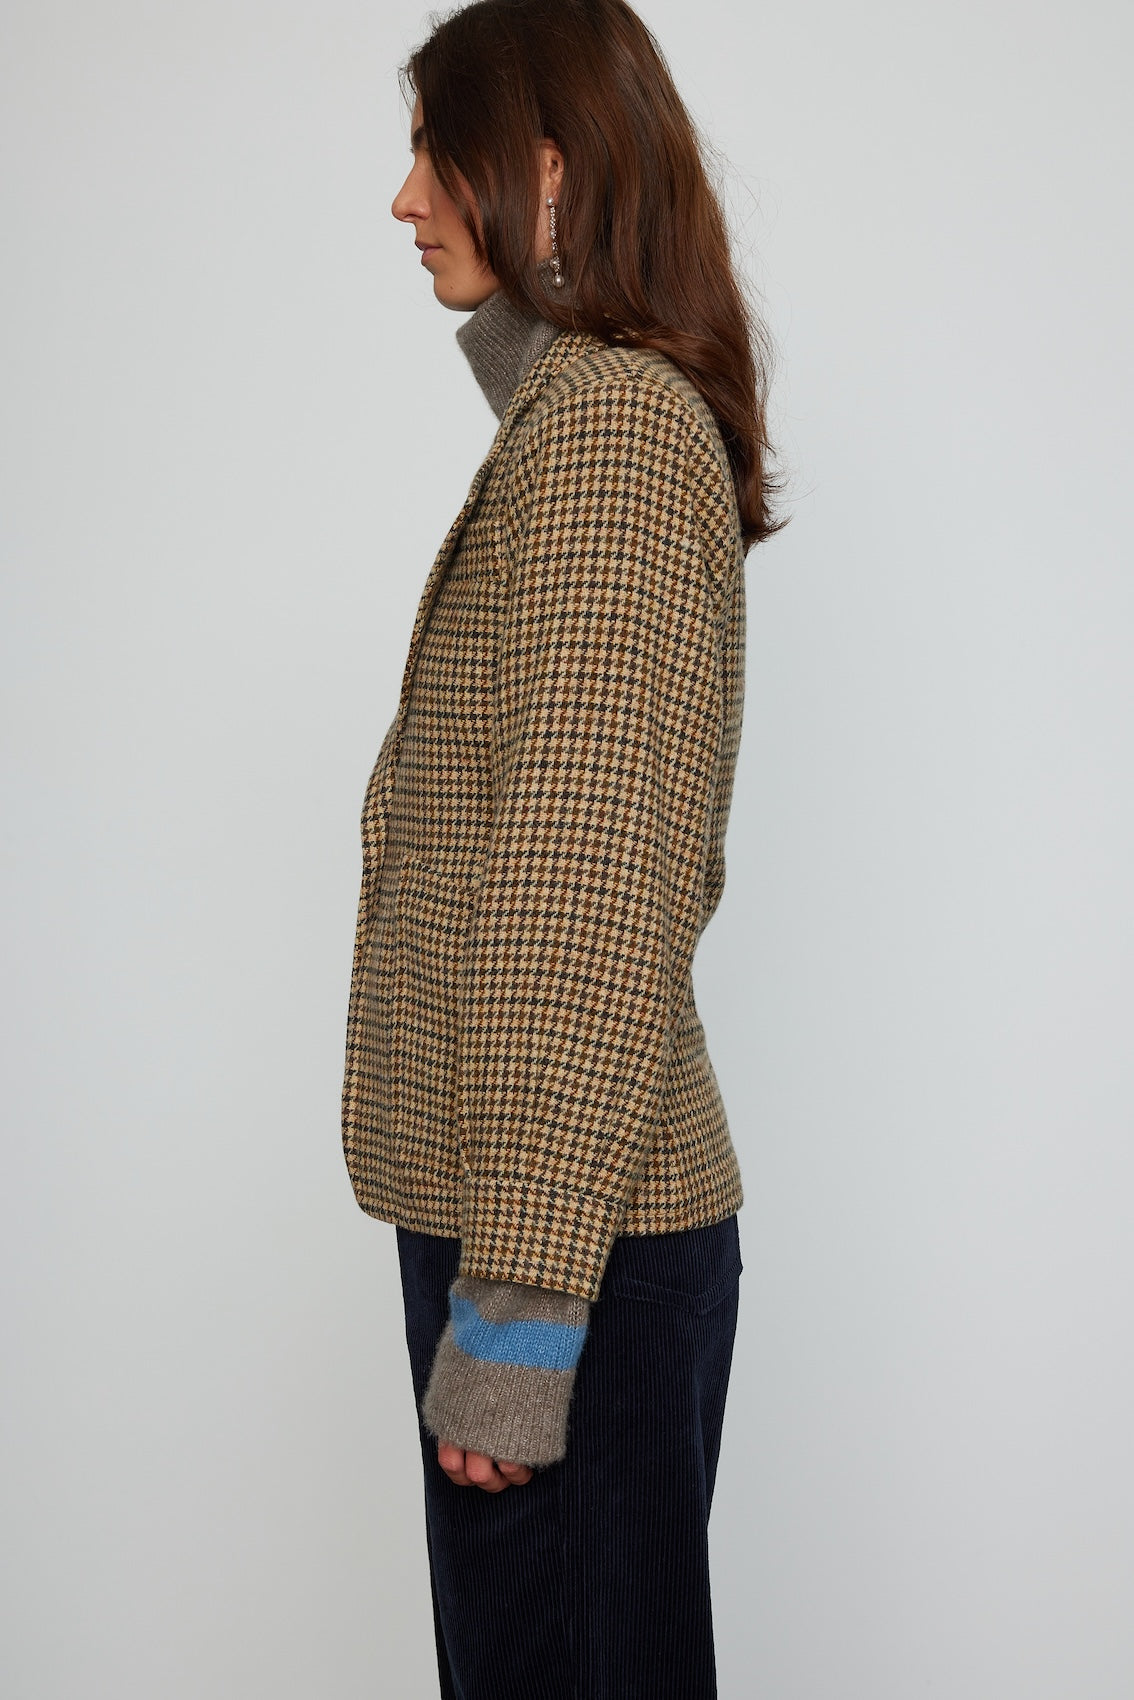 Caro Editions The Annika Jacket in a classic houndstooth tweed The jacket features a single-button closing at the front, wide padded shoulders, and large front pockets. The jacket is slightly fitted around the waist.  Material: 100% wool. Lining: 100% viscose.